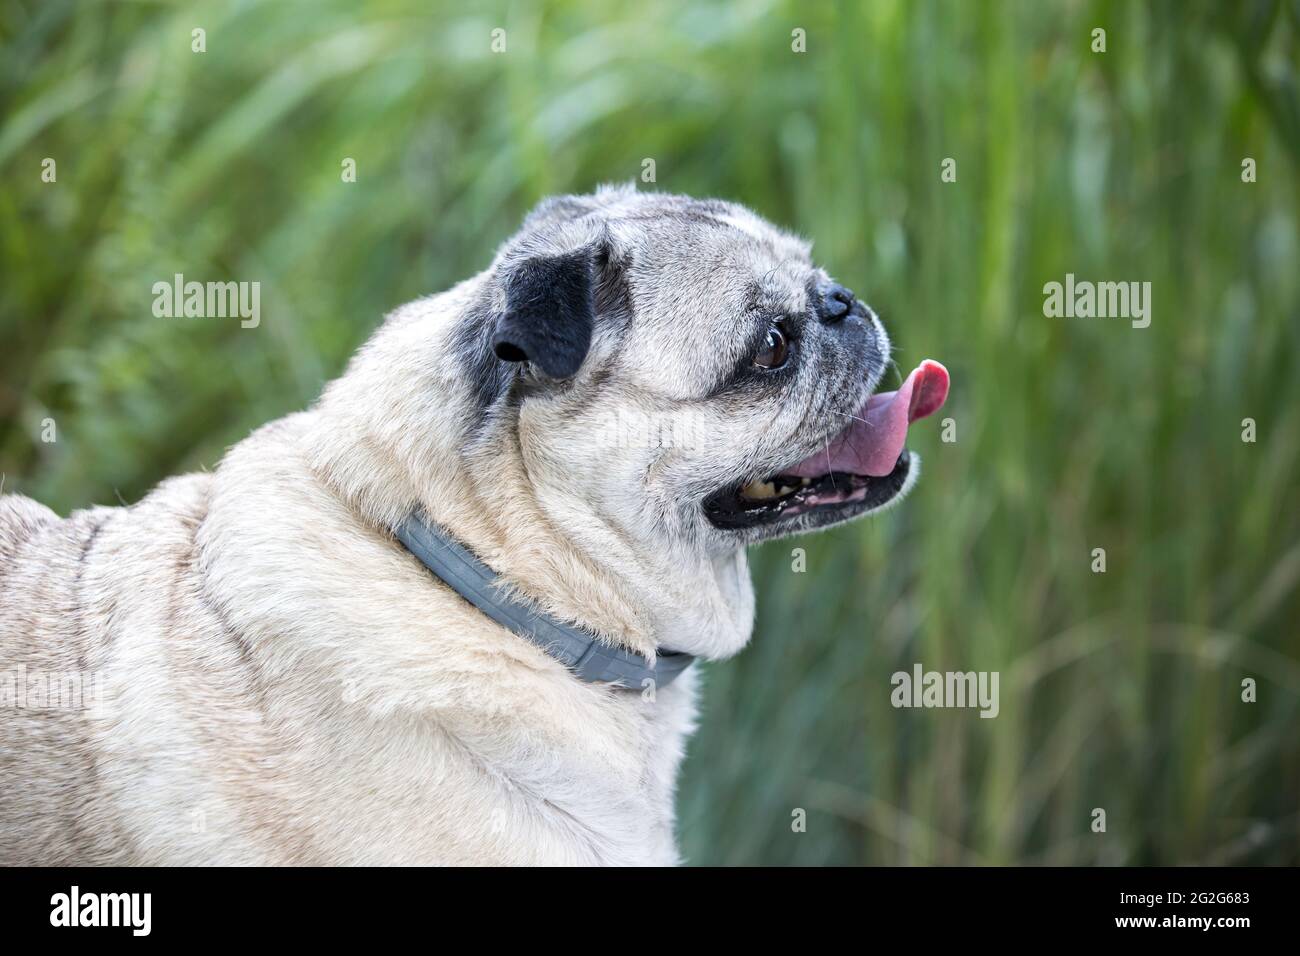 A close-up side-view of pug dog with grass in background. Stock Photo